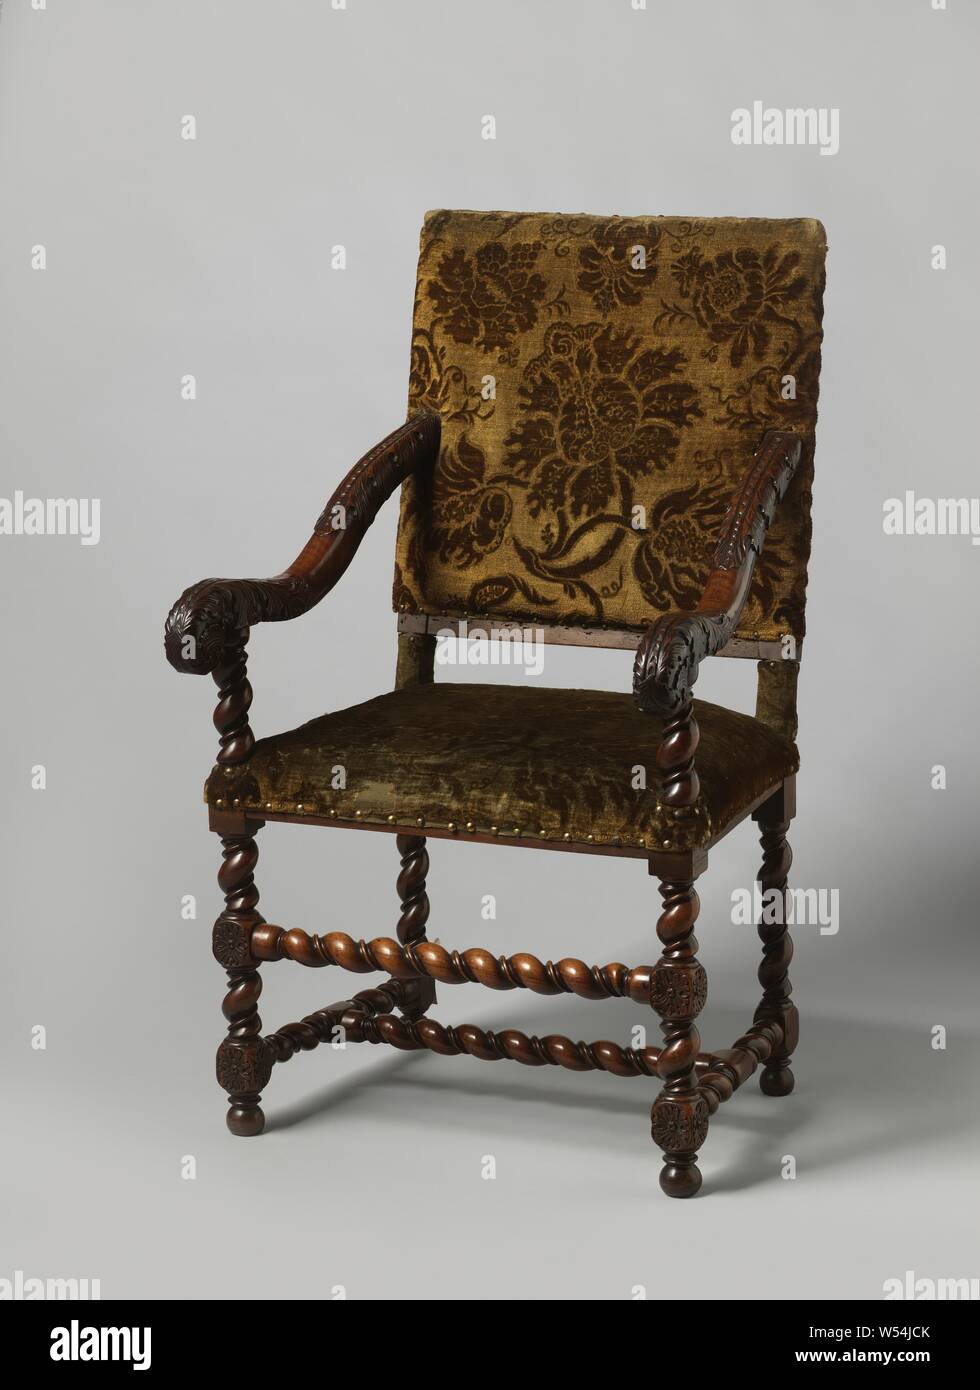 Armchair with slung legs, upholstered in bronze-colored floral trim, Armchair in walnut, upholstered in bronze-colored floral trim. The furniture rests on slung legs that are connected by an equally slung H-shaped cross and front-center sport, a bead has been placed between the pendulum. The houses have stabbed rosettes. The armrest struts are concave, run up in the back window and end in volutes, which, like the back, are adorned with acanthus leaves with scaly middle veins., anonymous, Northern Netherlands, 1675 - 1700, wood (plant material), walnut (hardwood), h 113.5 cm × w 67 cm × d 68 cm Stock Photo